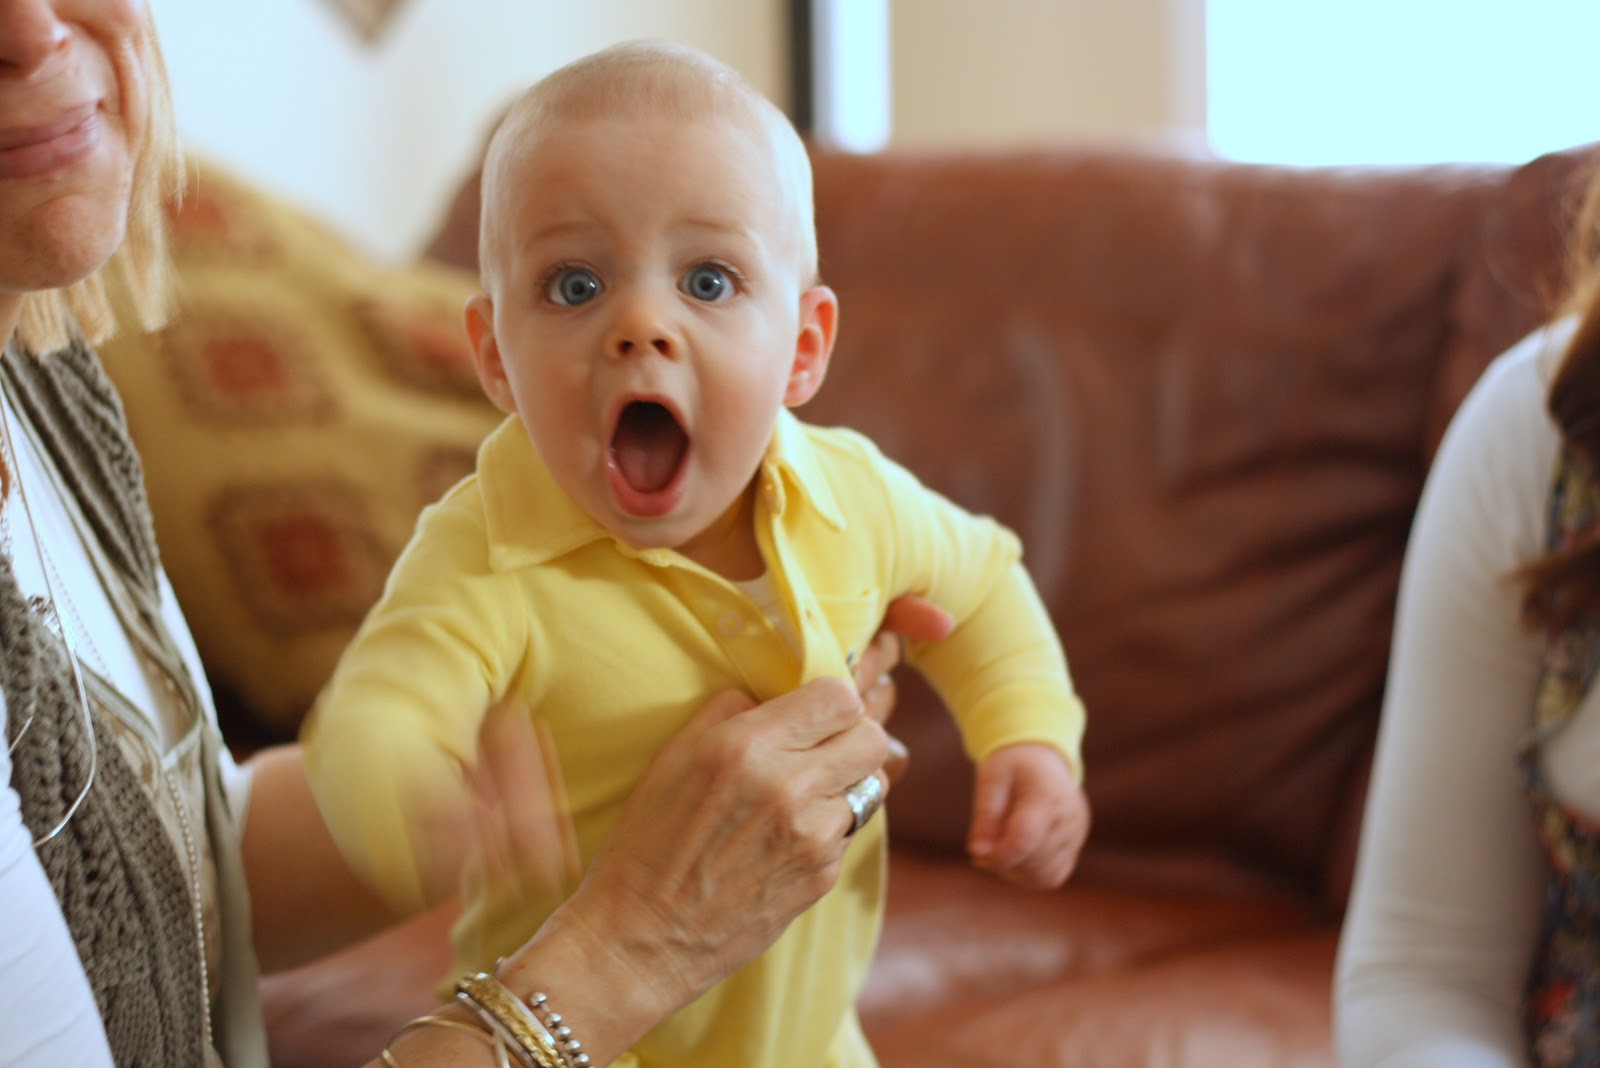 excited baby Memes - Imgflip.